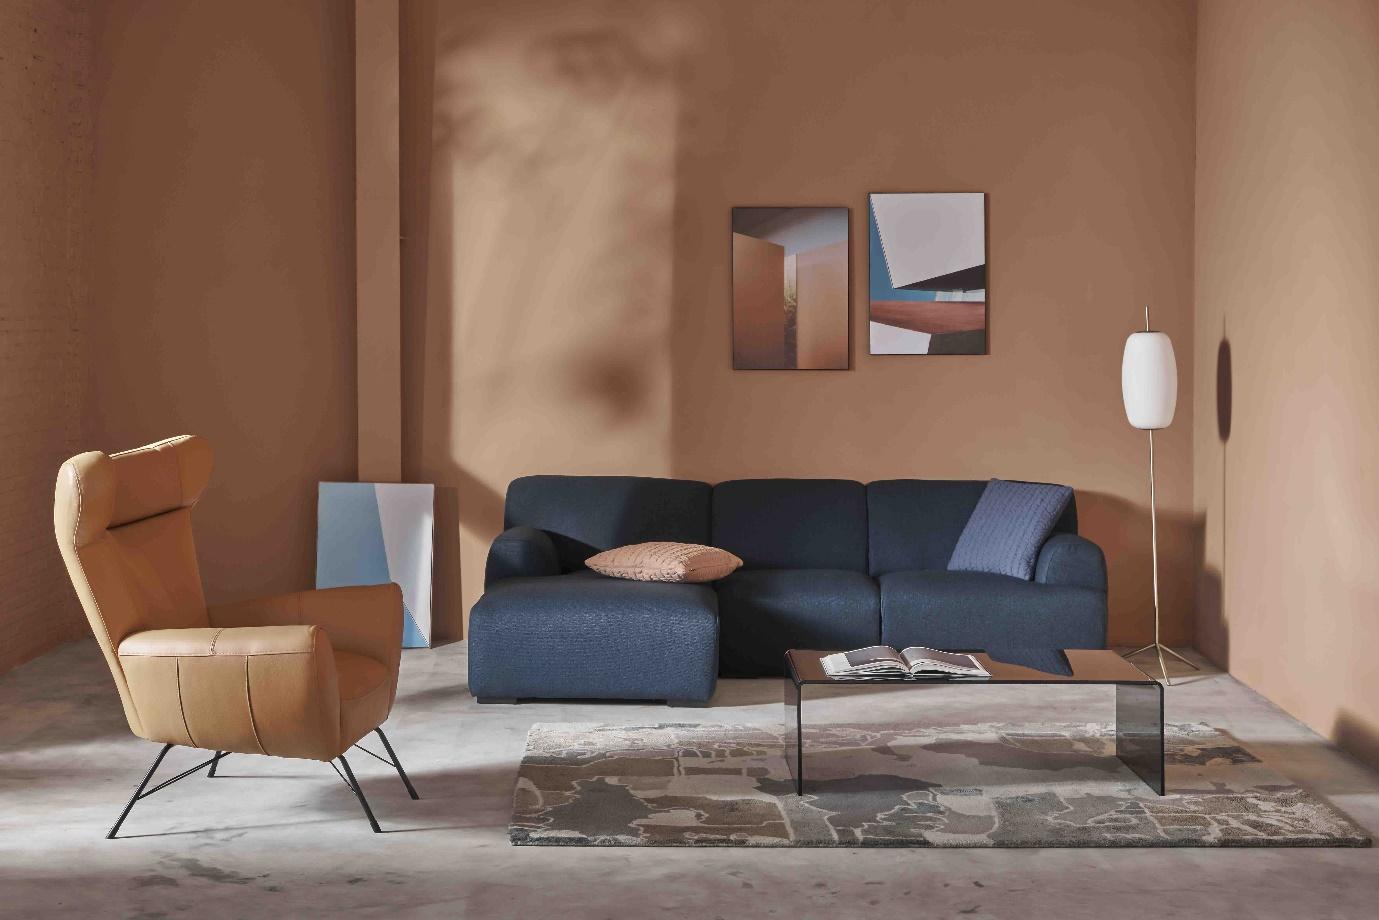 A living room with a blue couch

Description automatically generated with medium confidence